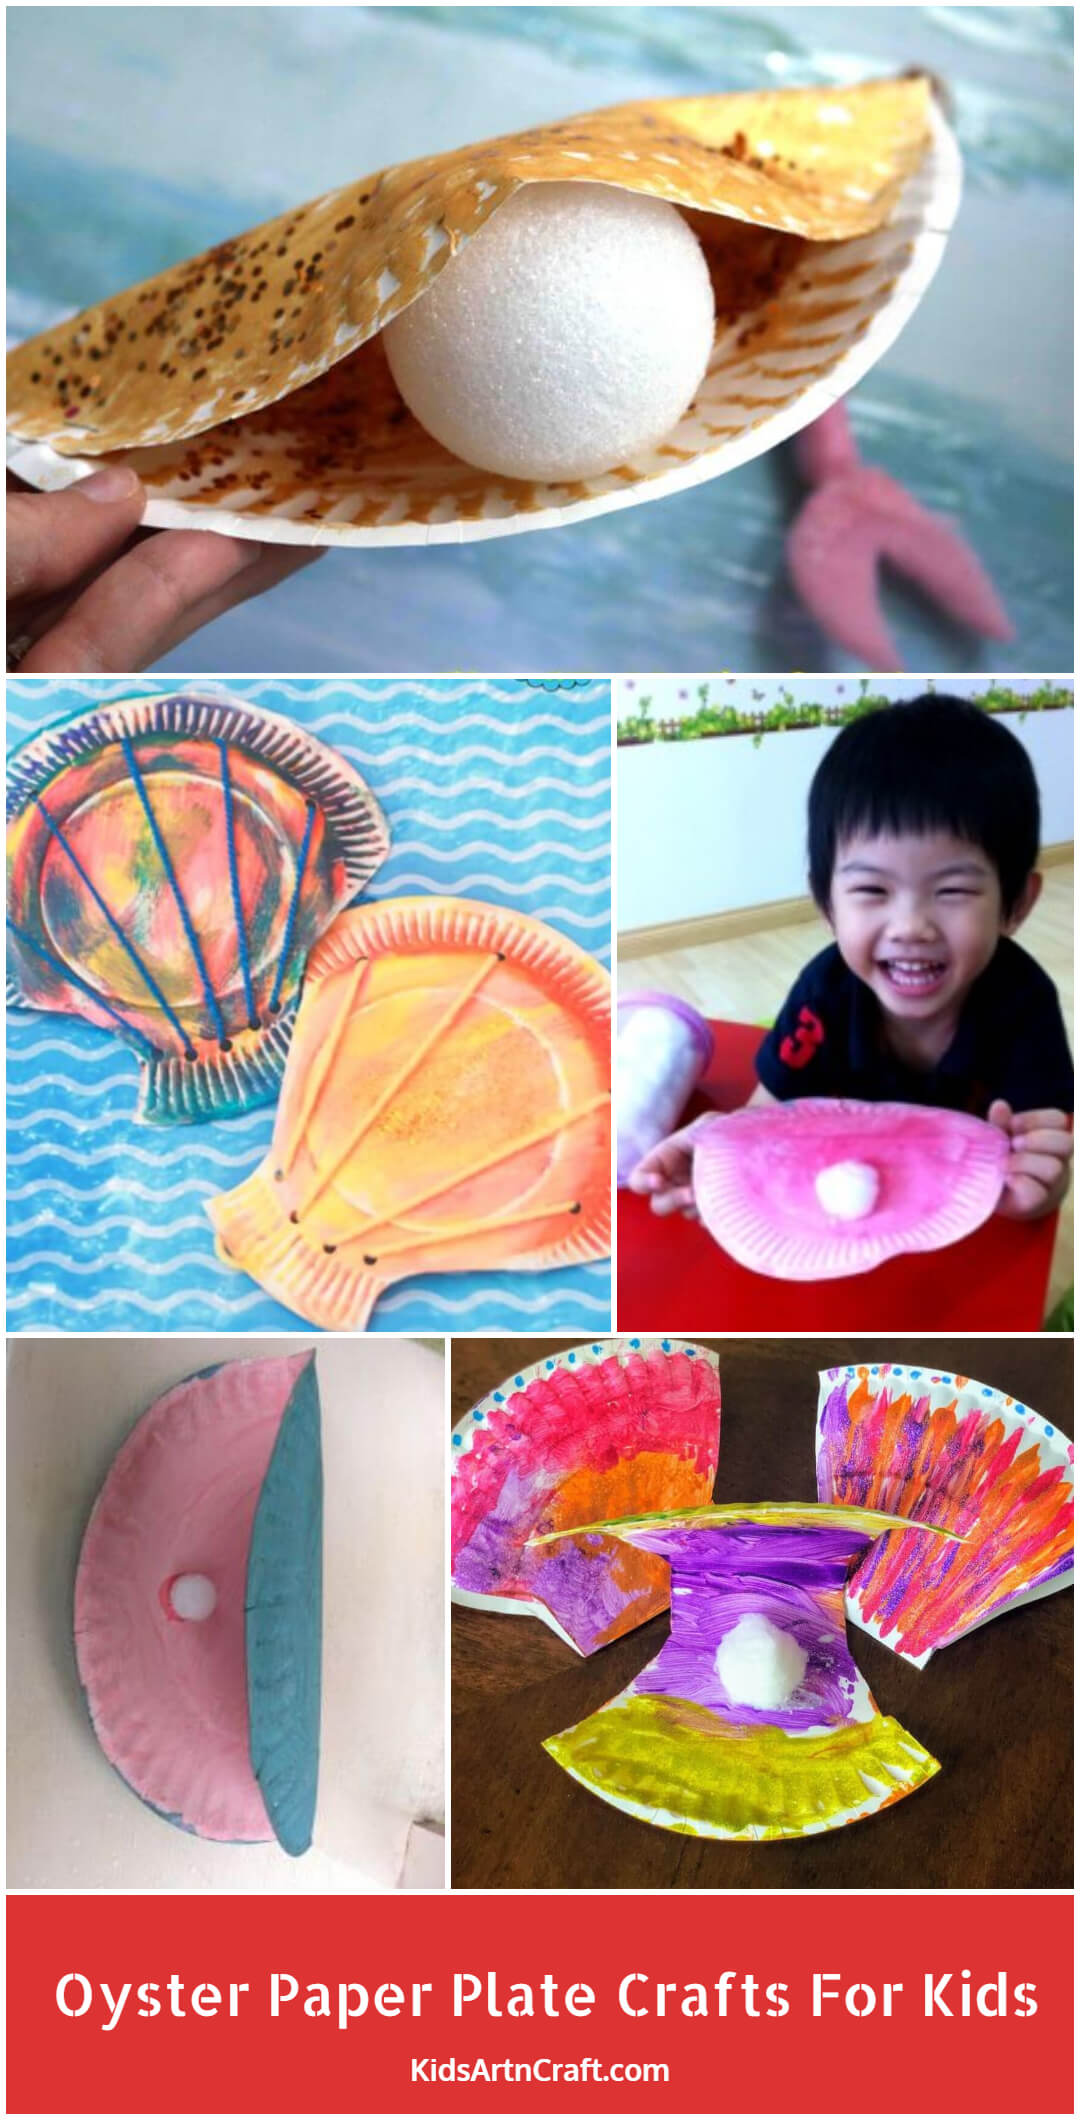 Oyster Paper Plate Crafts For Kids